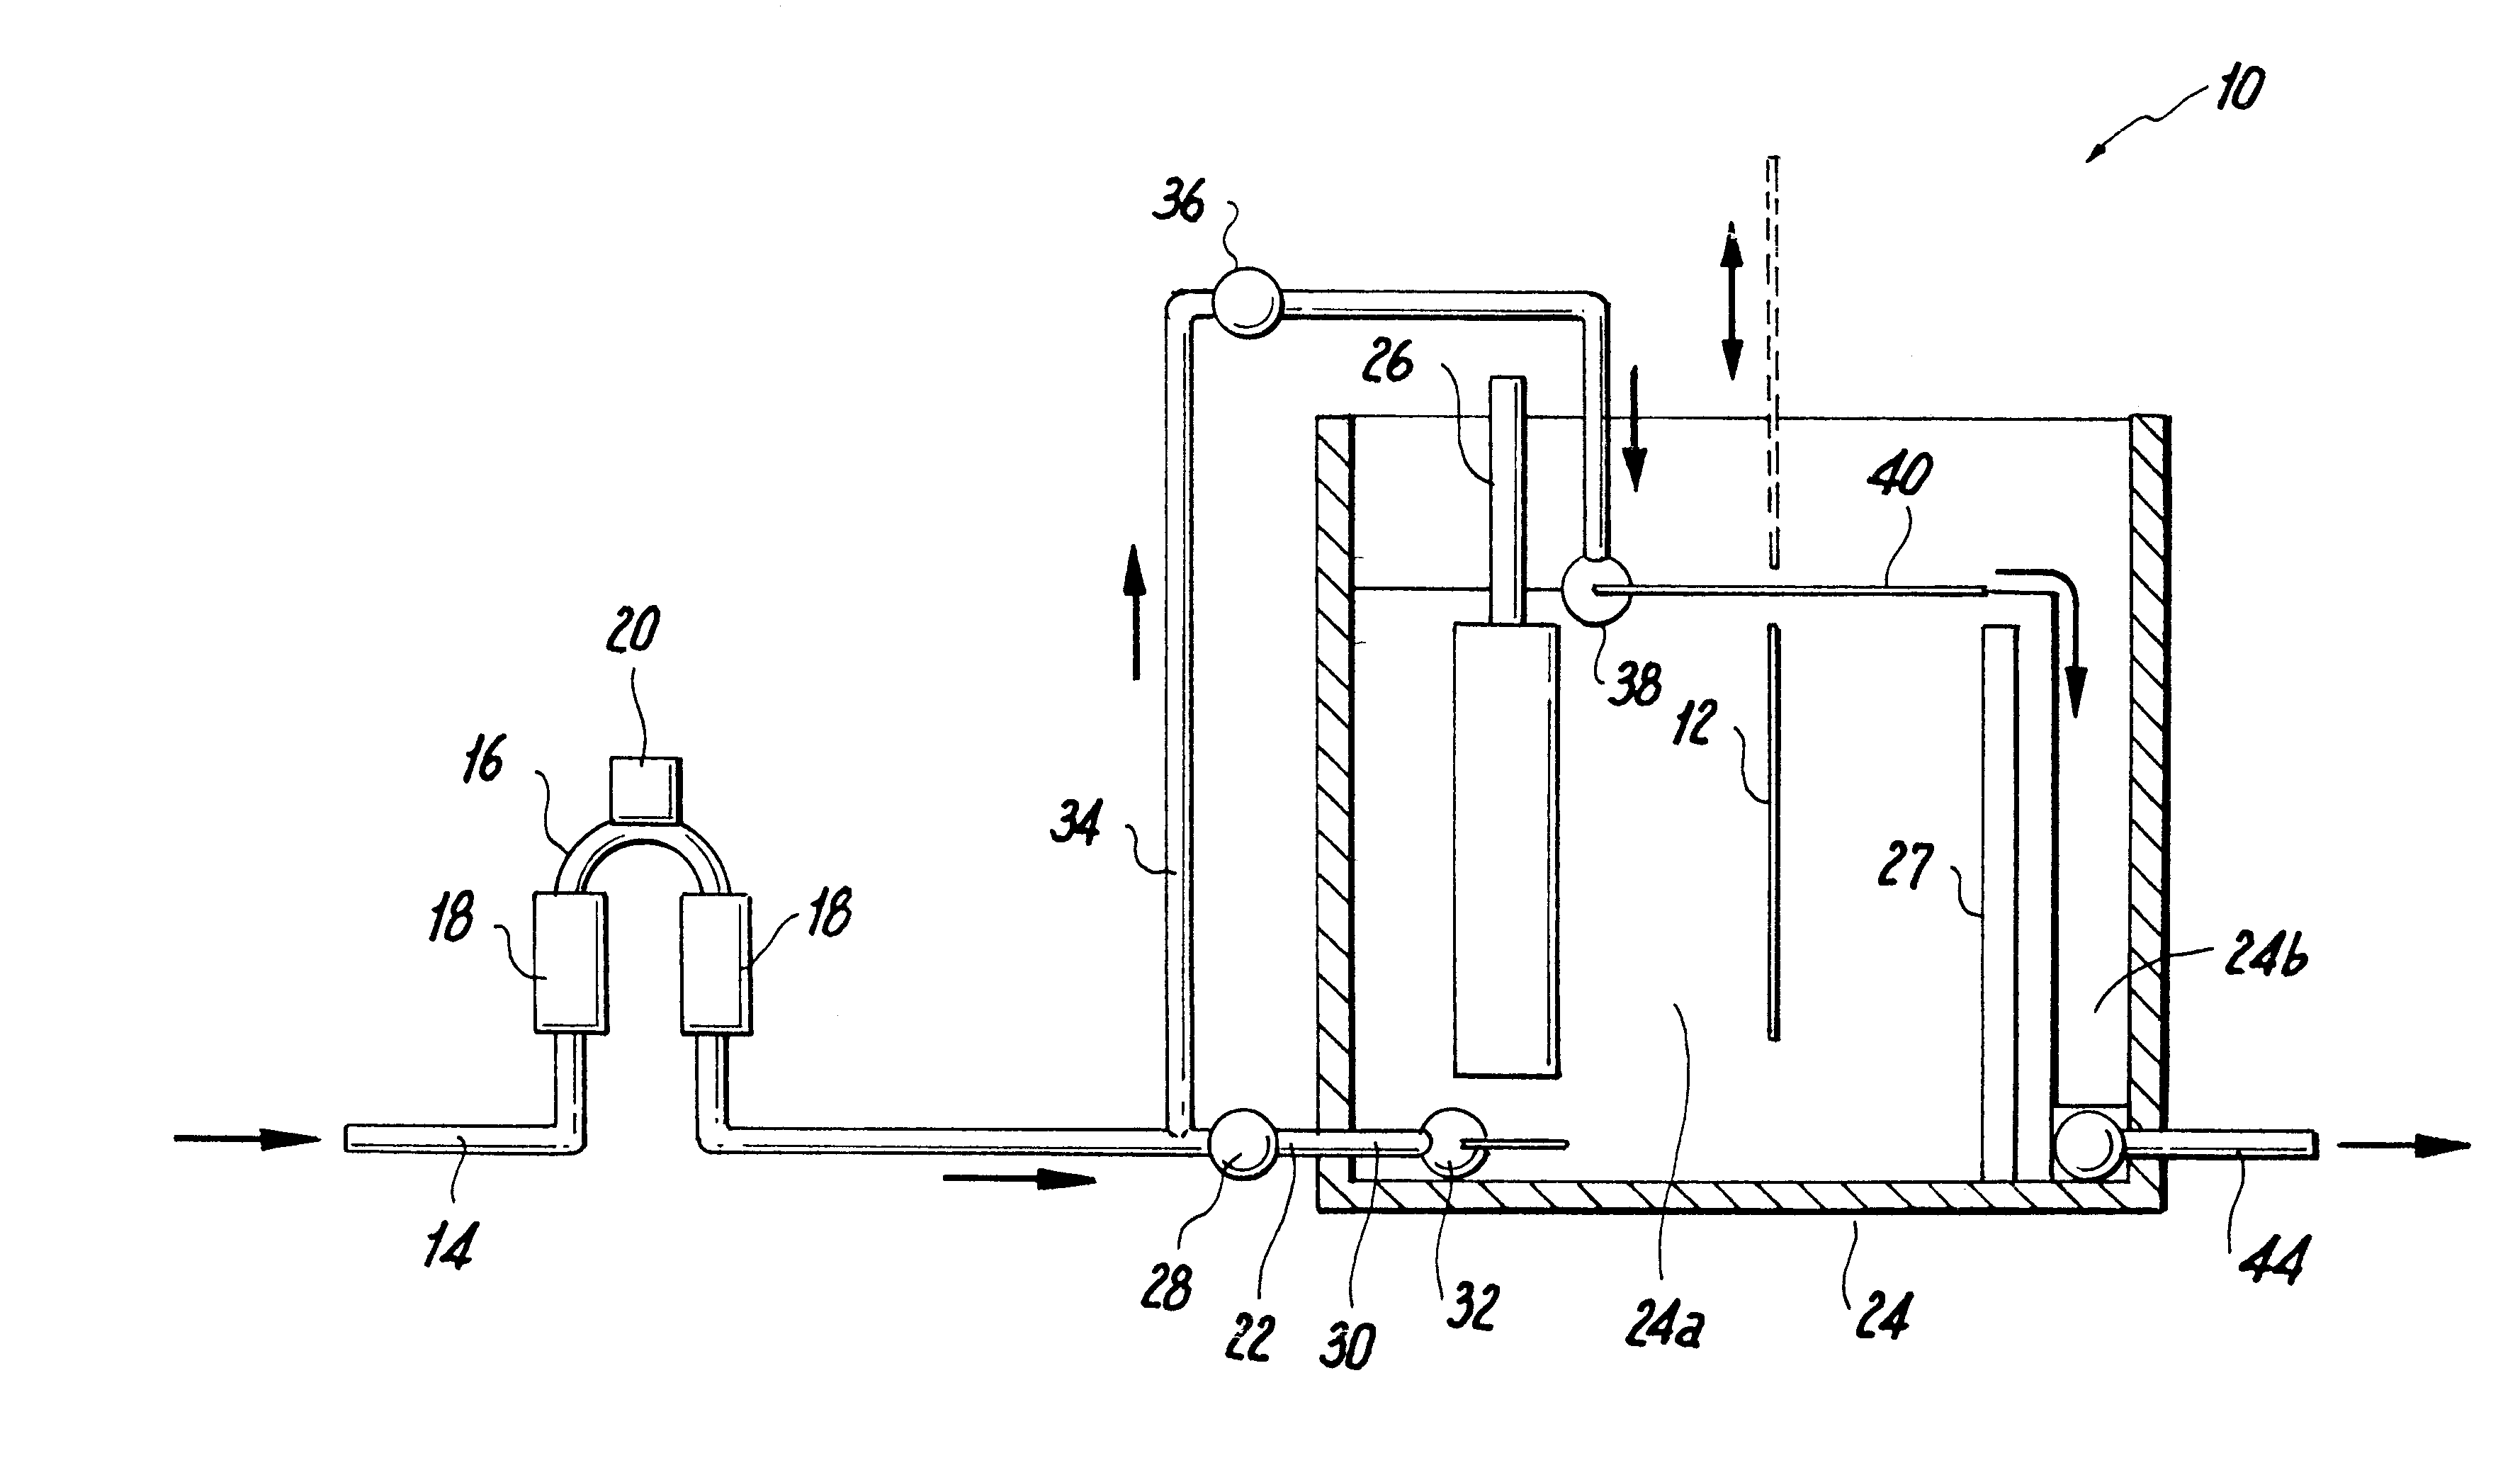 Arrangement and method for degassing small-high aspect ratio drilled holes prior to wet chemical processing